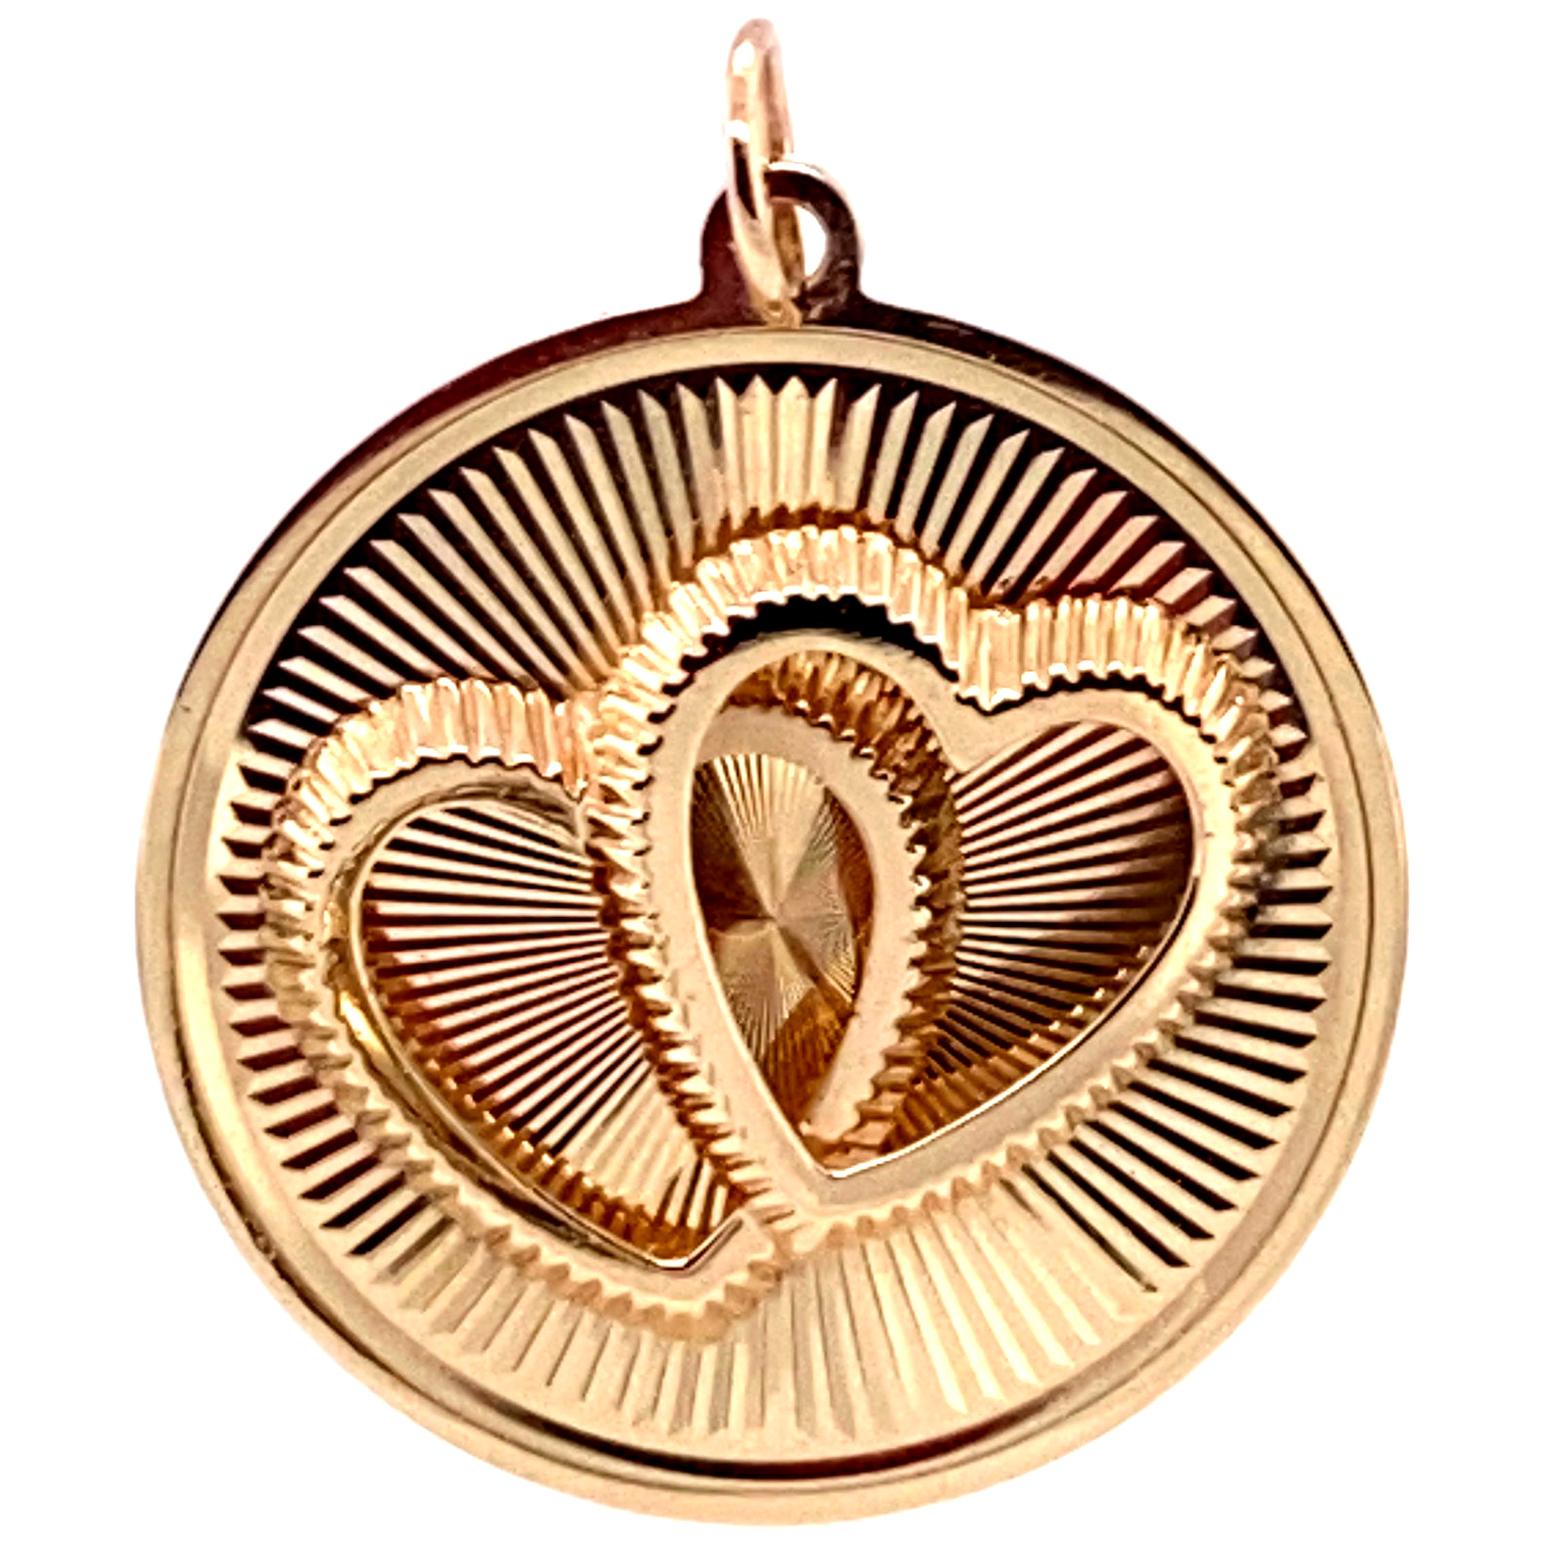  Romantic double-heart charm.. Made and signed by HENRY DANKNER & SONS.  Two three-dimensional intertwined fluted hearts applied on a background of  engraved rayed lines.  14K yellow gold.  In pristine condition. 1 1/16